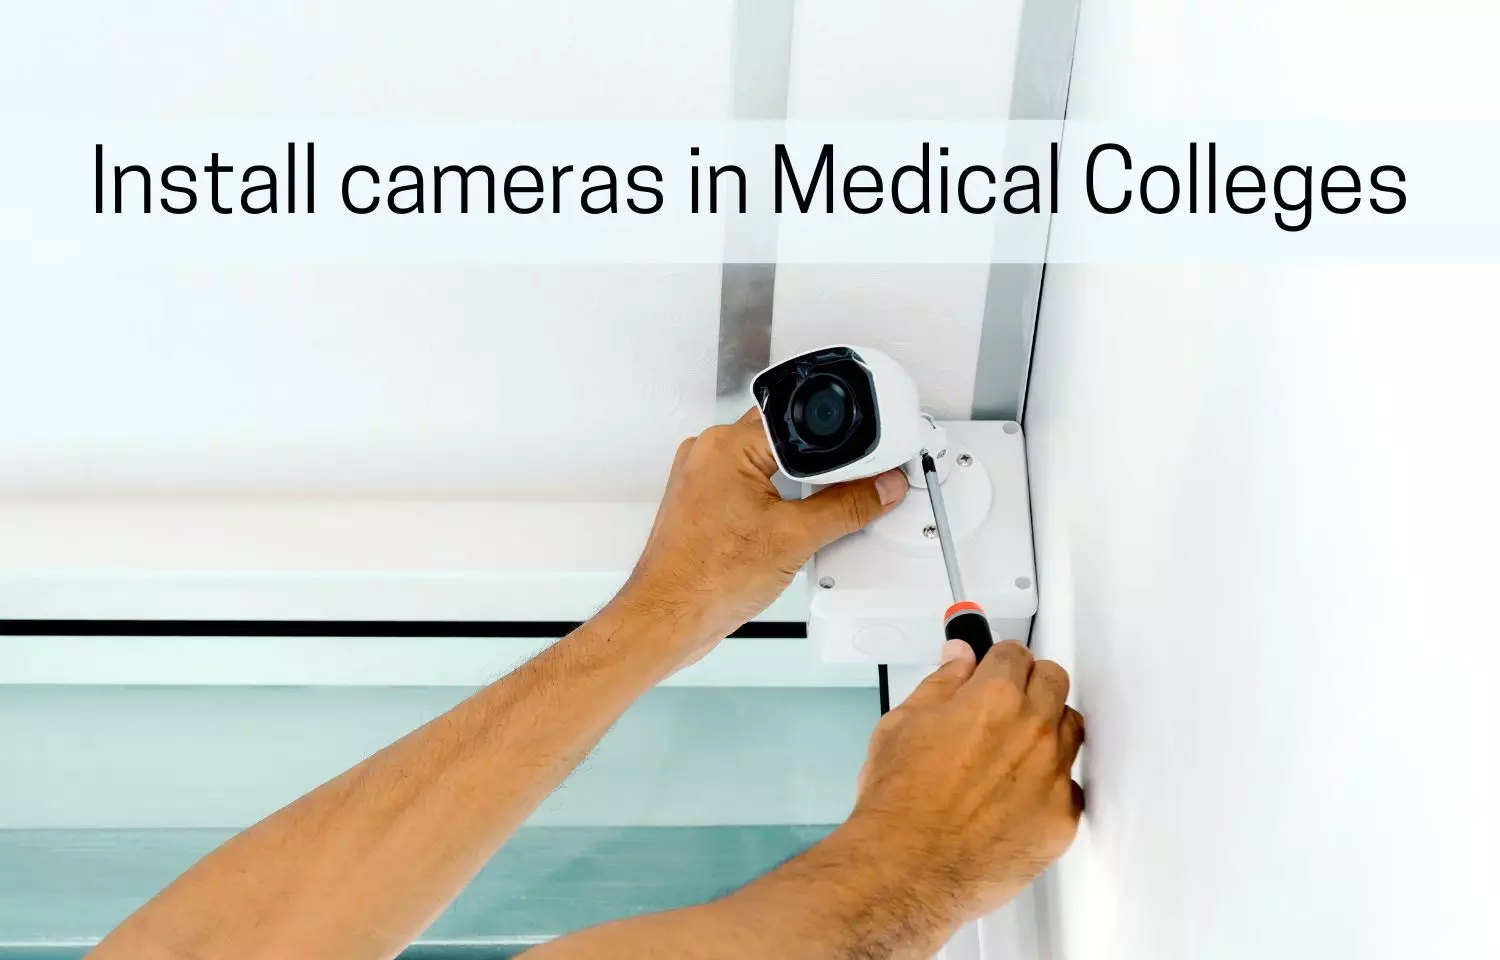 CCTV Mandatory: NMC directs all medical institutes to install cameras, prescribes list